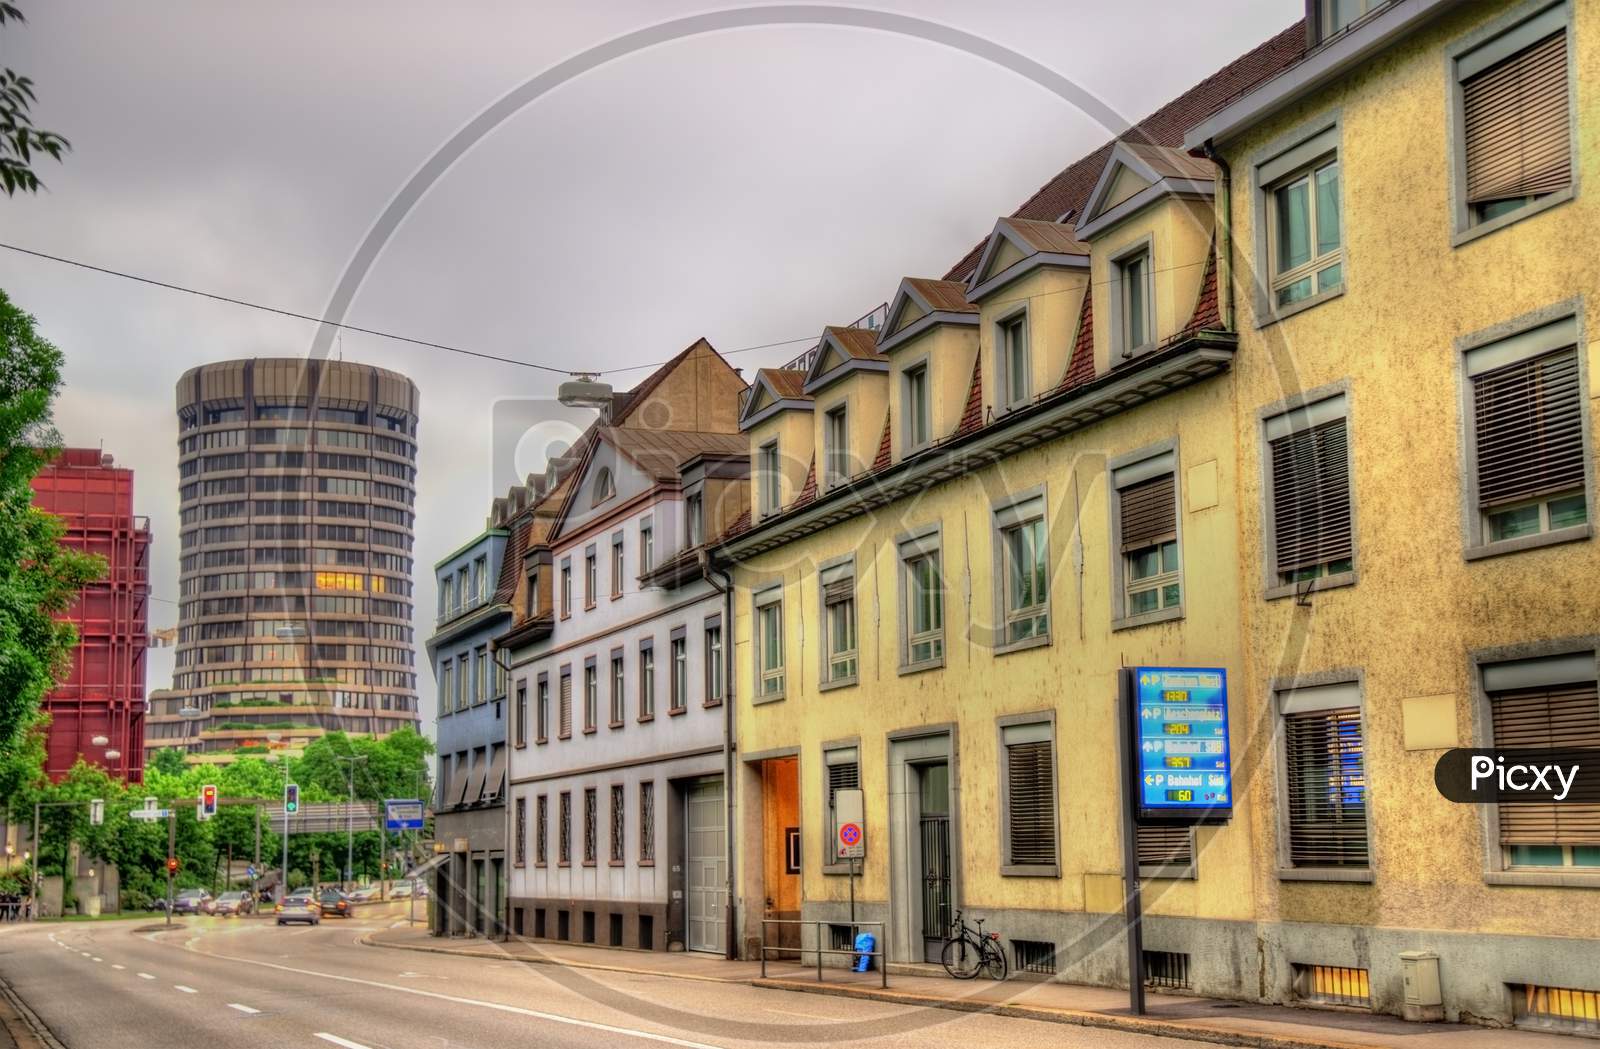 Buildings In The City Centre Of Basel